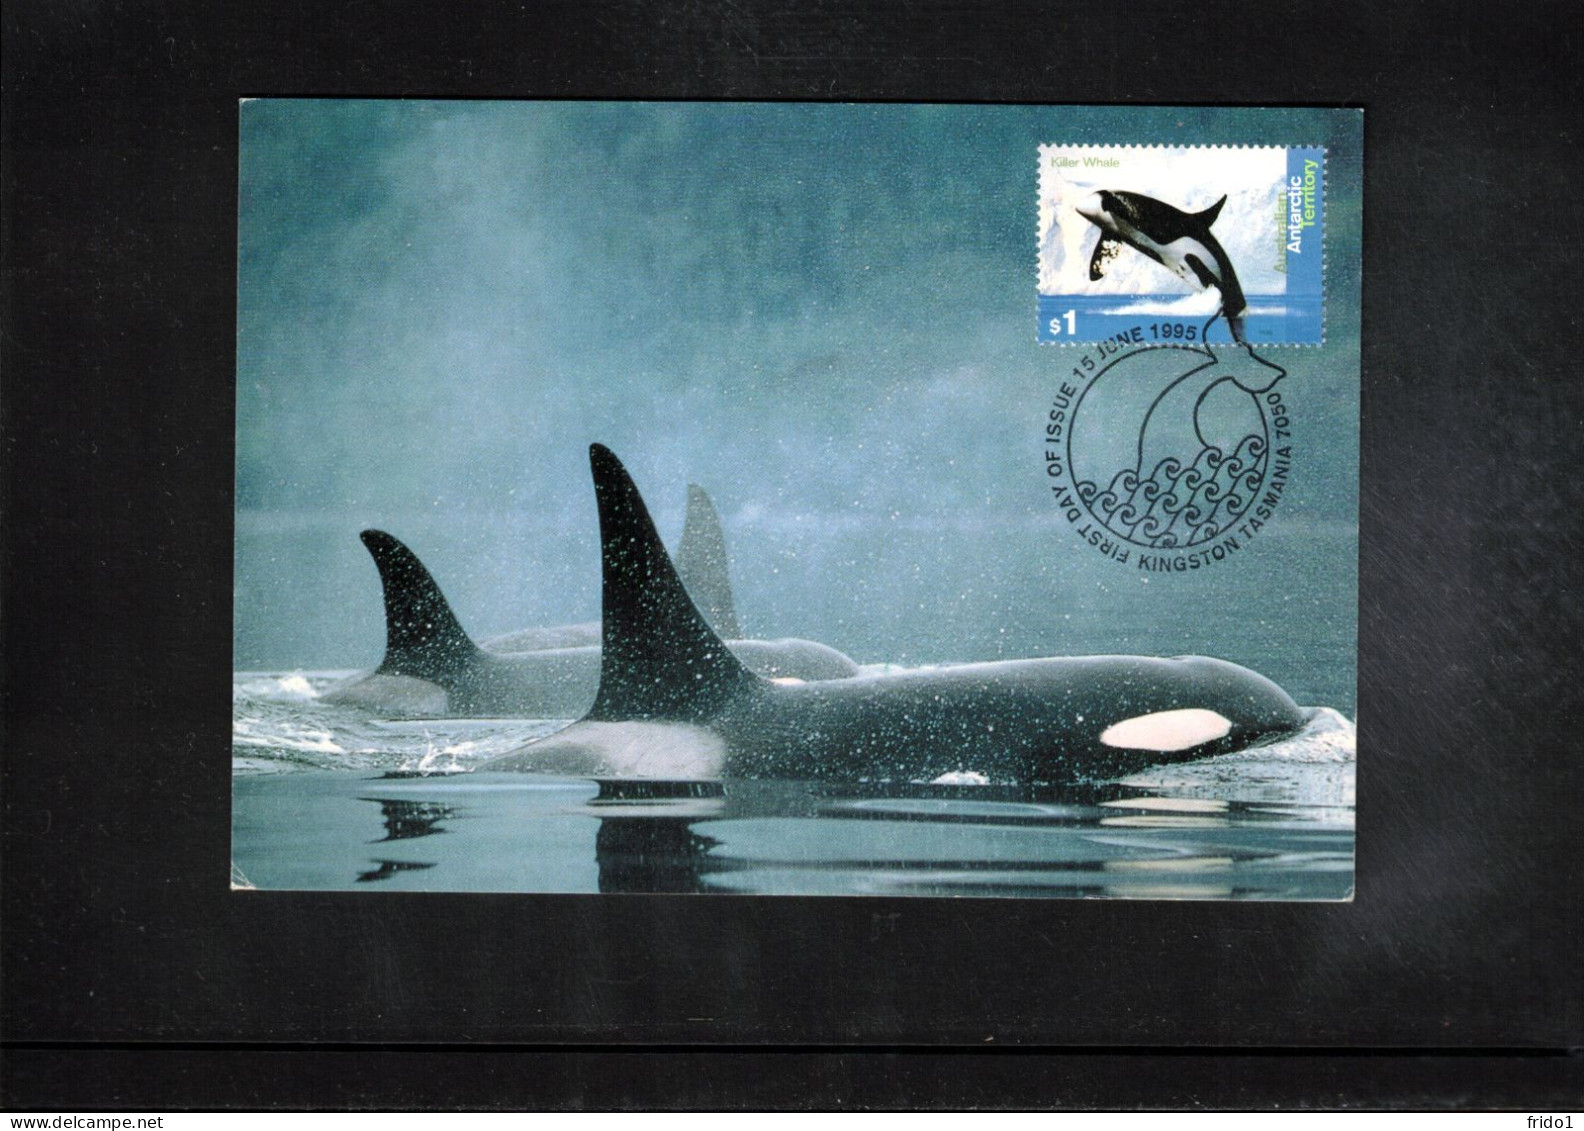 Australian Antarctic Territory 1996 Antarctica - Base Casey - Casey Ice Edge Fly-Off  - Whales Interesting Cover - Bases Antarctiques